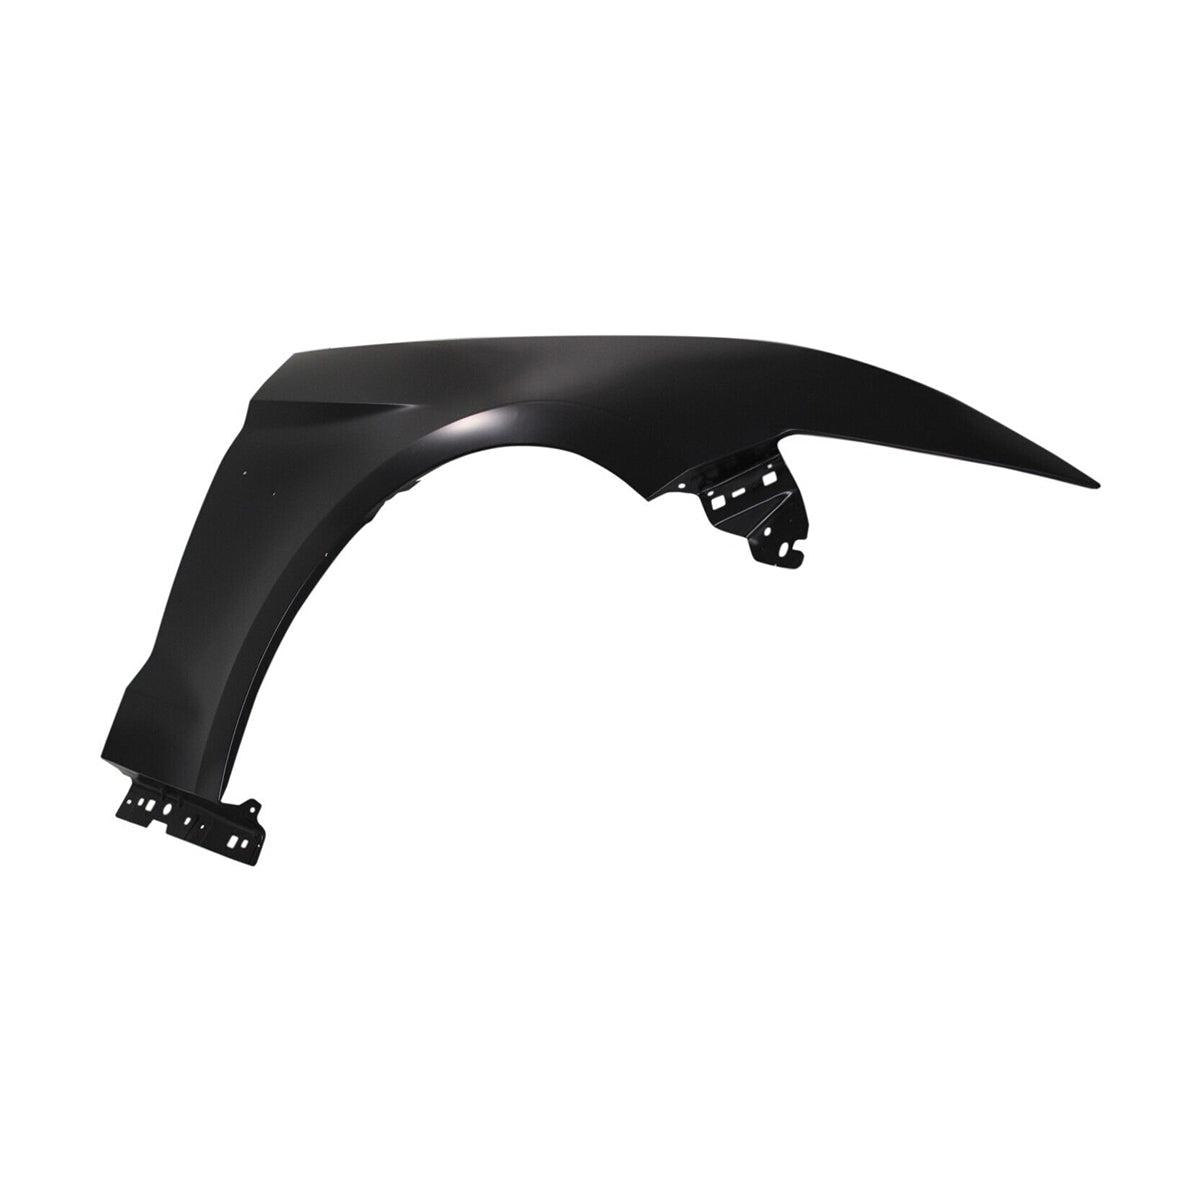 Replacement FRONT FENDER, RH, 2015-2017 Ford Mustang, FR3Z16005A, (Alum)